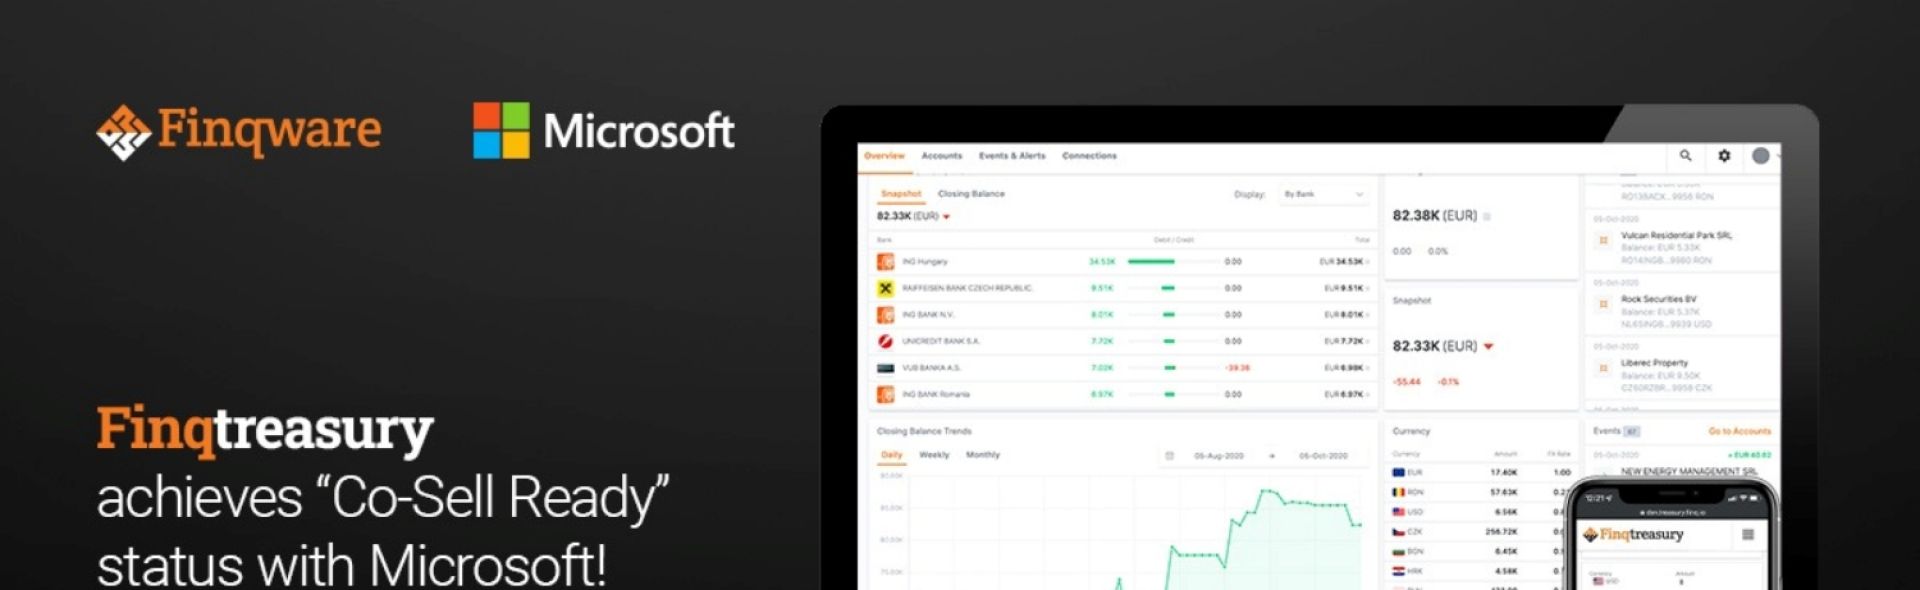 FinqTreasury now available on Microsoft AppSource